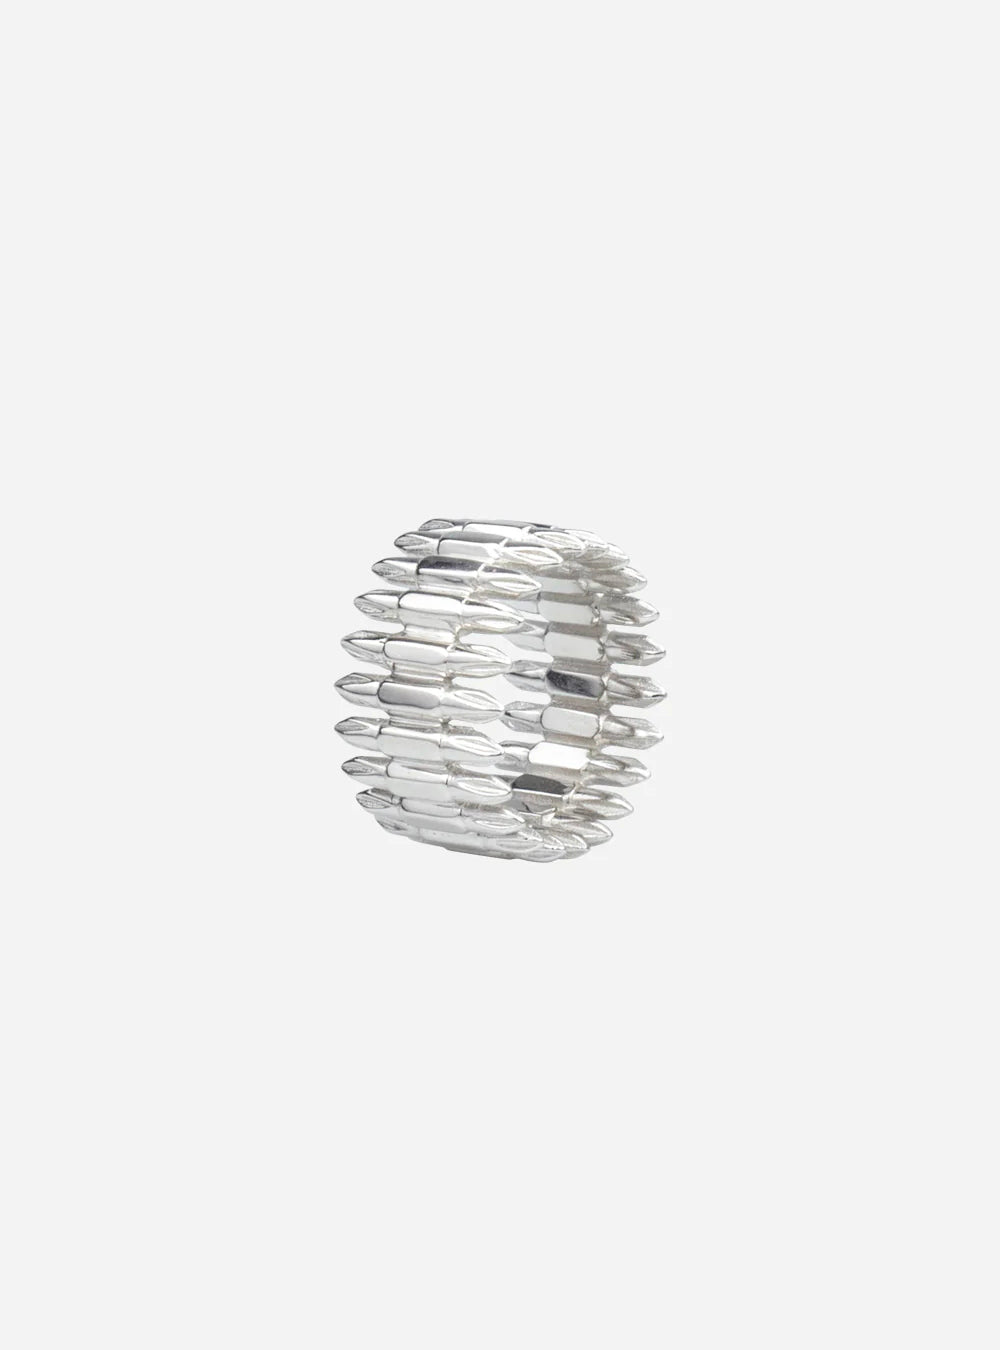 a MIDNIGHTFACTORY Driverbits eternity ring on a white background.